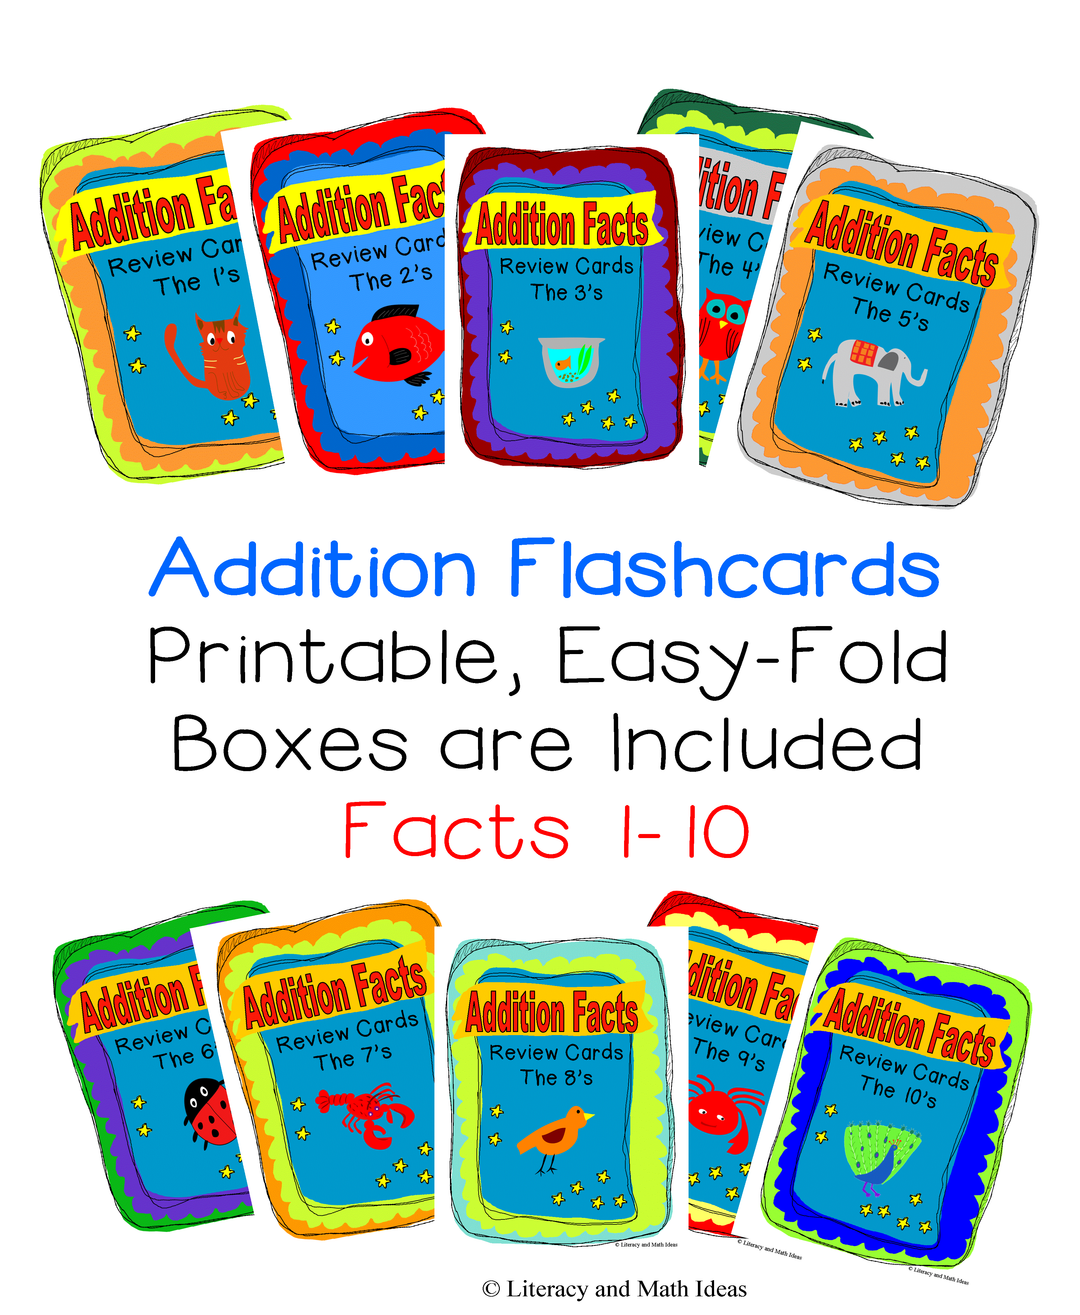 Addition Flashcards (Facts 1-10)